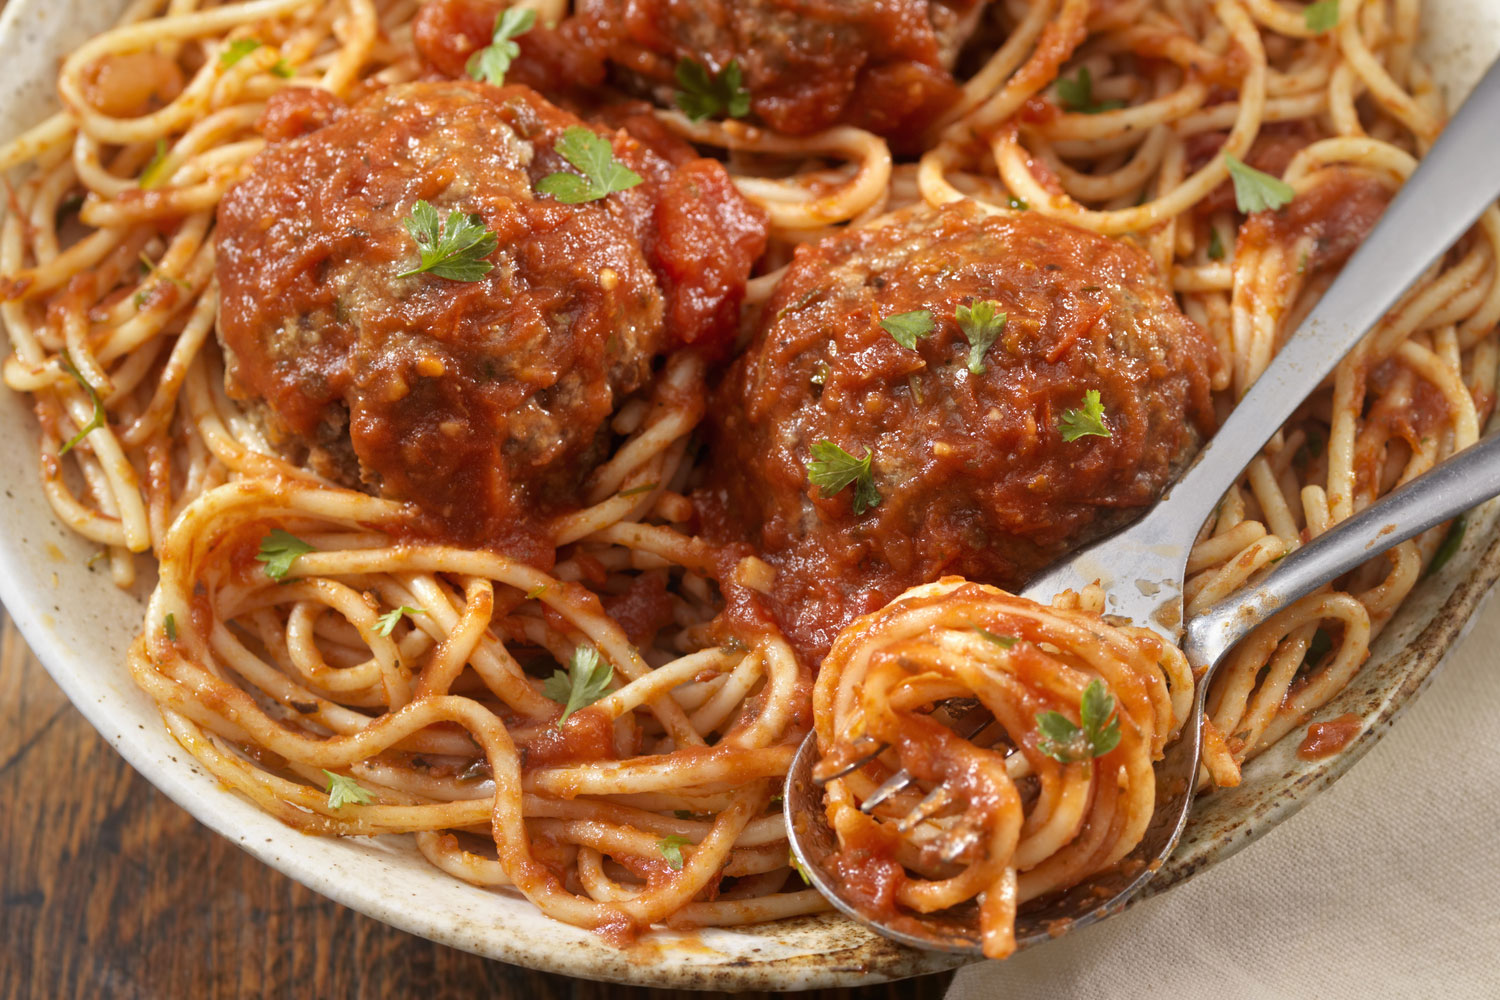 How to make Spaghetti Sauce with Meatballs - complete recipe, ingredients, cook...